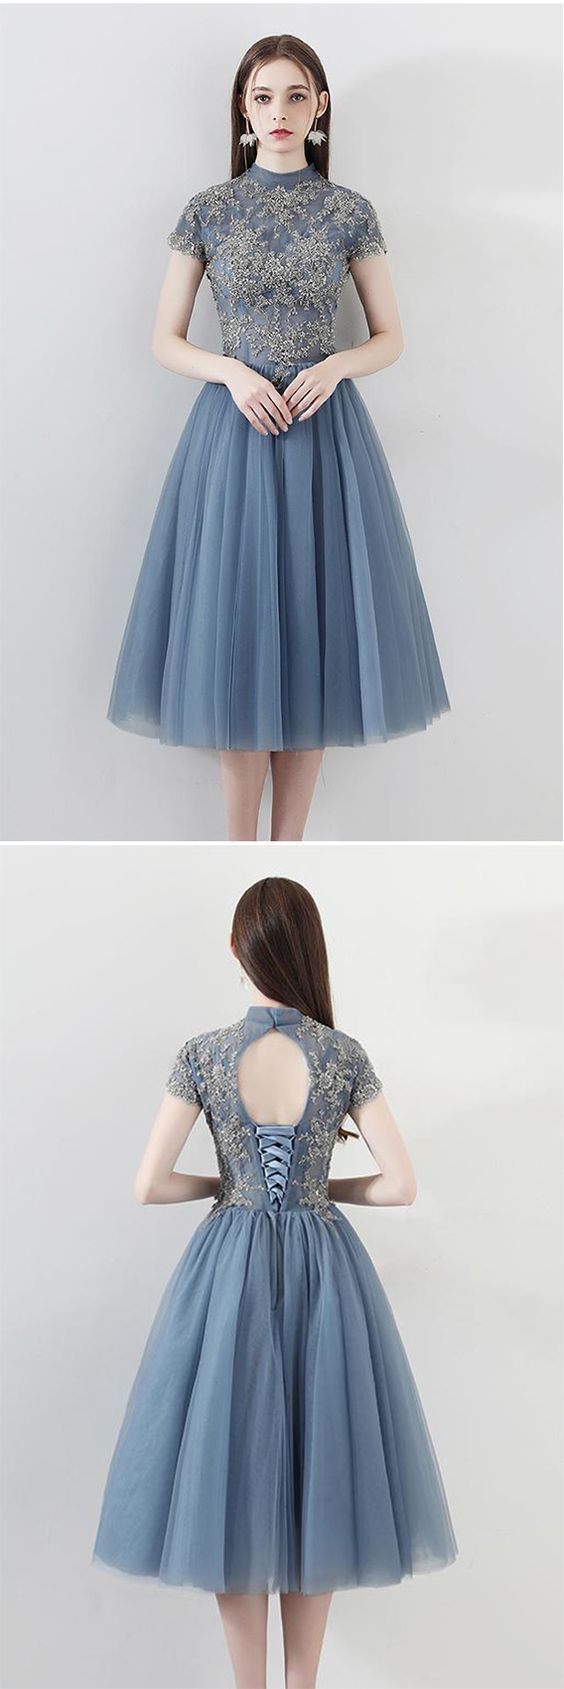 Blue Tulle Short Sleeves High Neck Appliques Amy A Line Homecoming Dresses 810